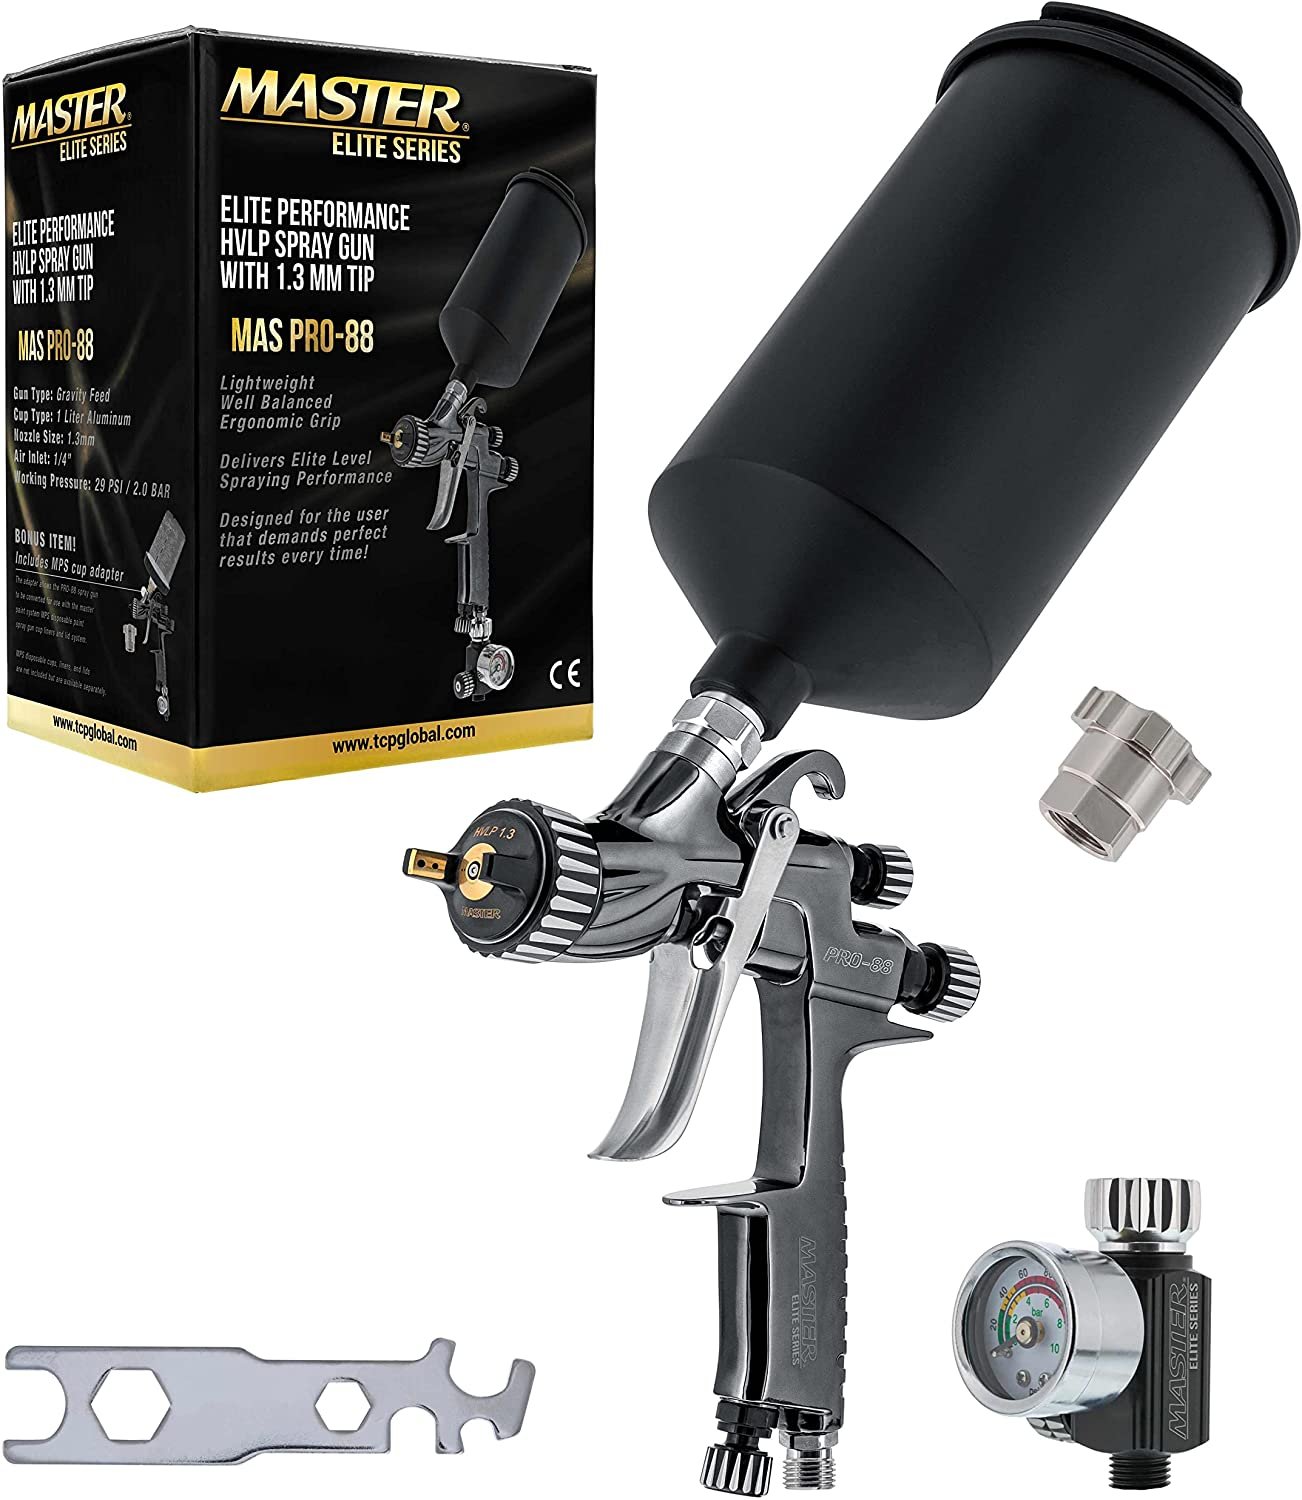 Professional HVLP Paint Sprayers Explained - How to Pick the